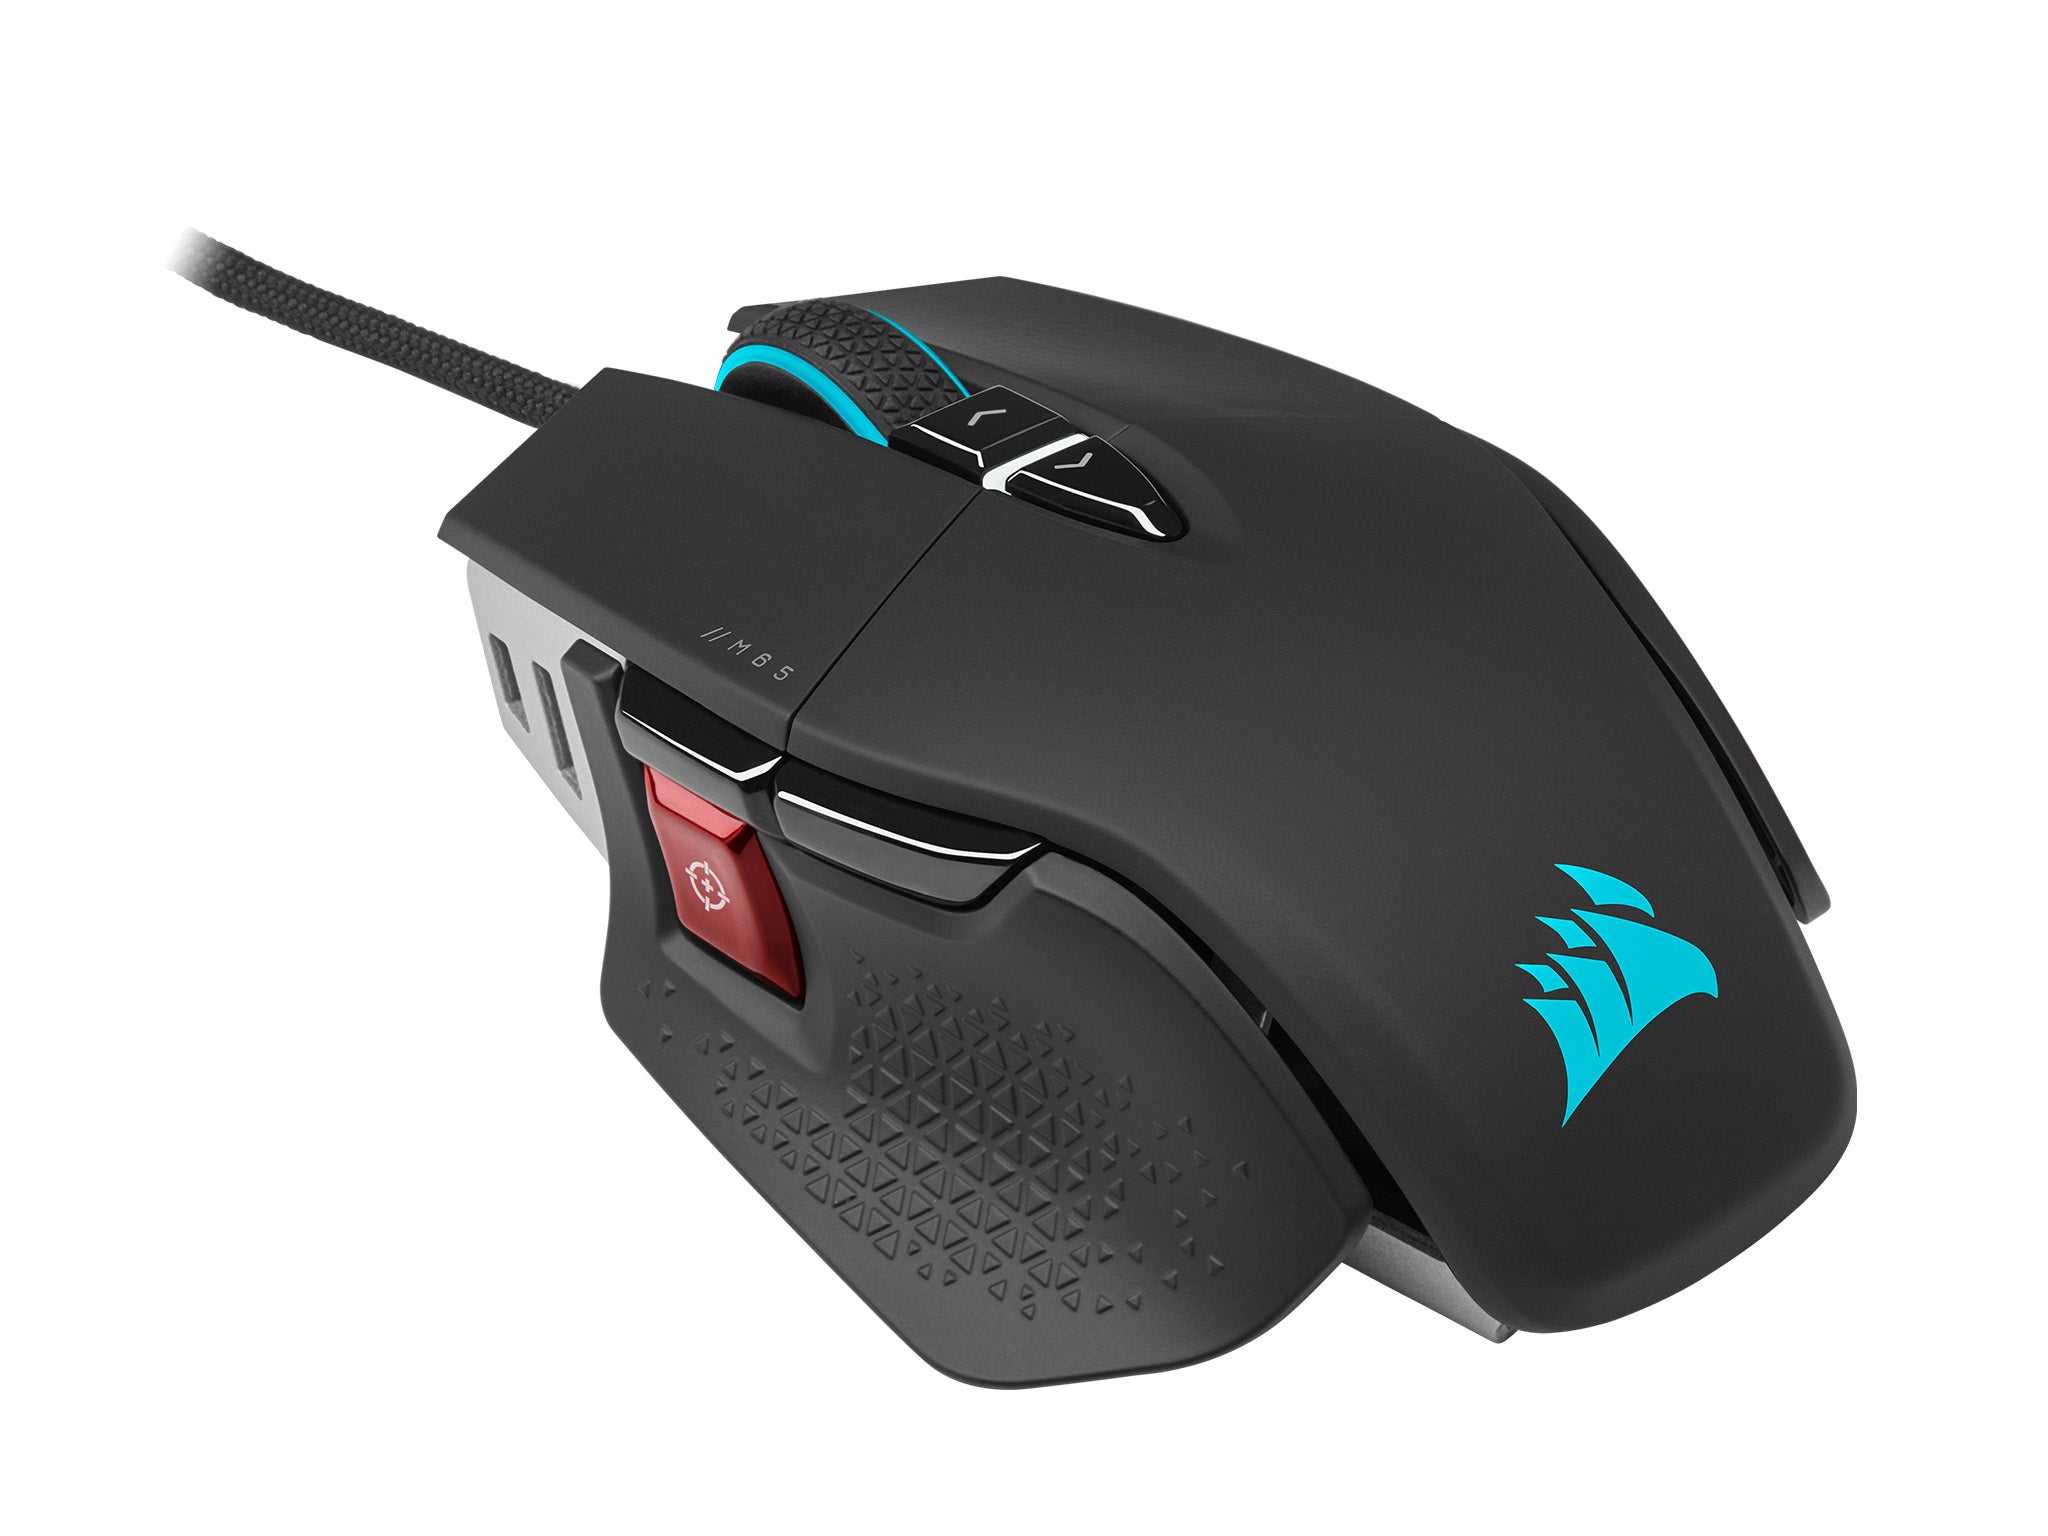 Corsair M65 RGB ultra tunable gaming mouse